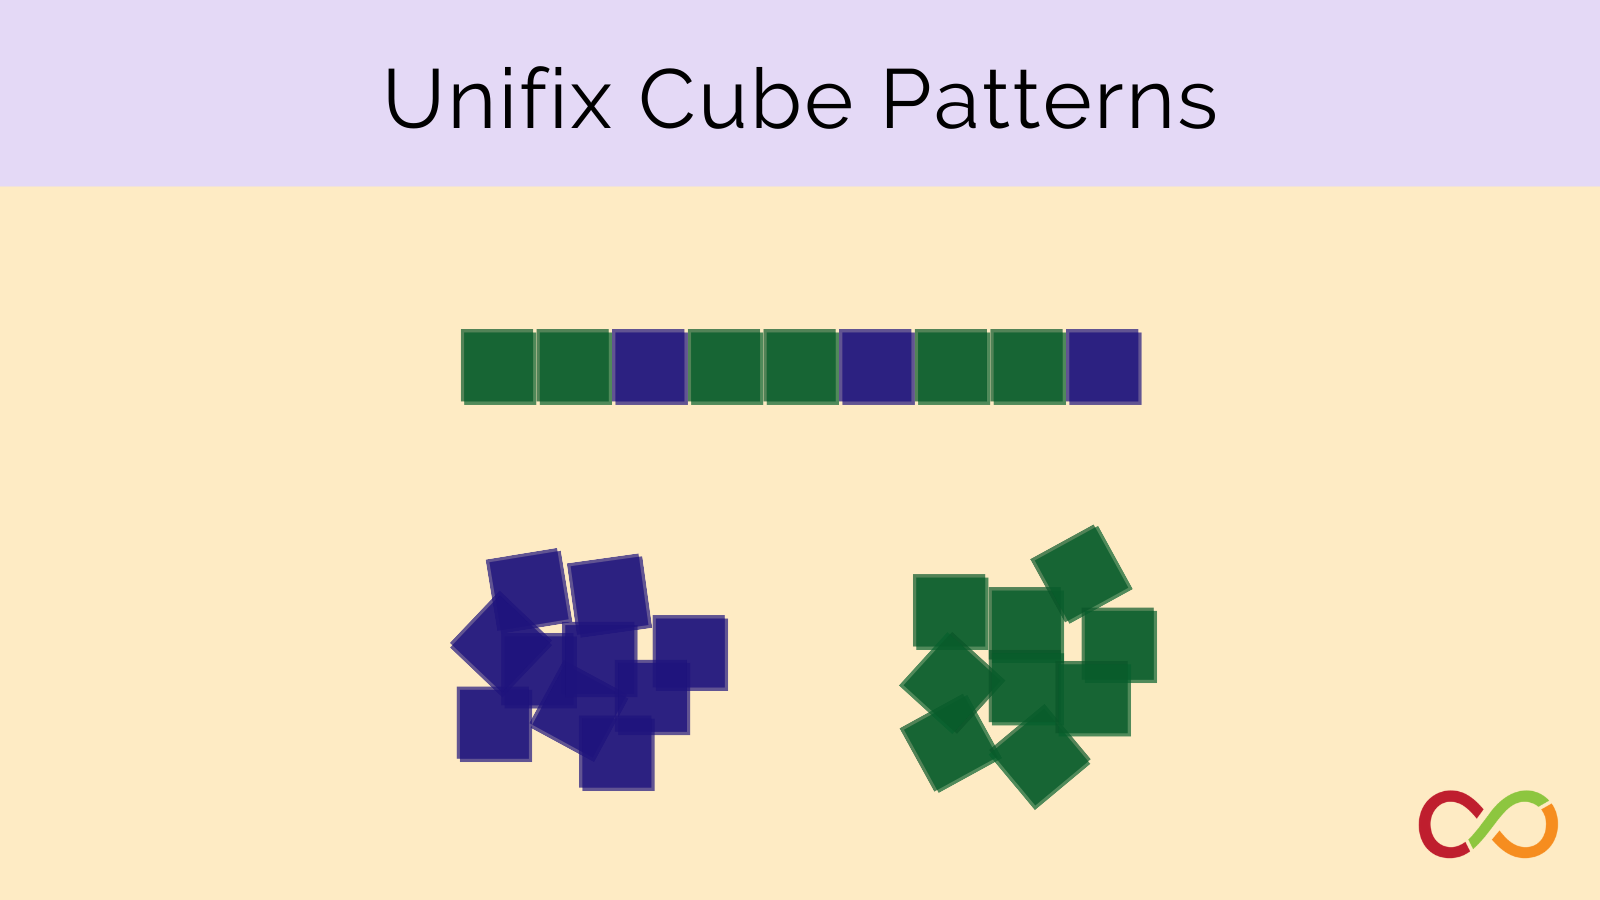 An image linking to the unifix cube patterns lesson